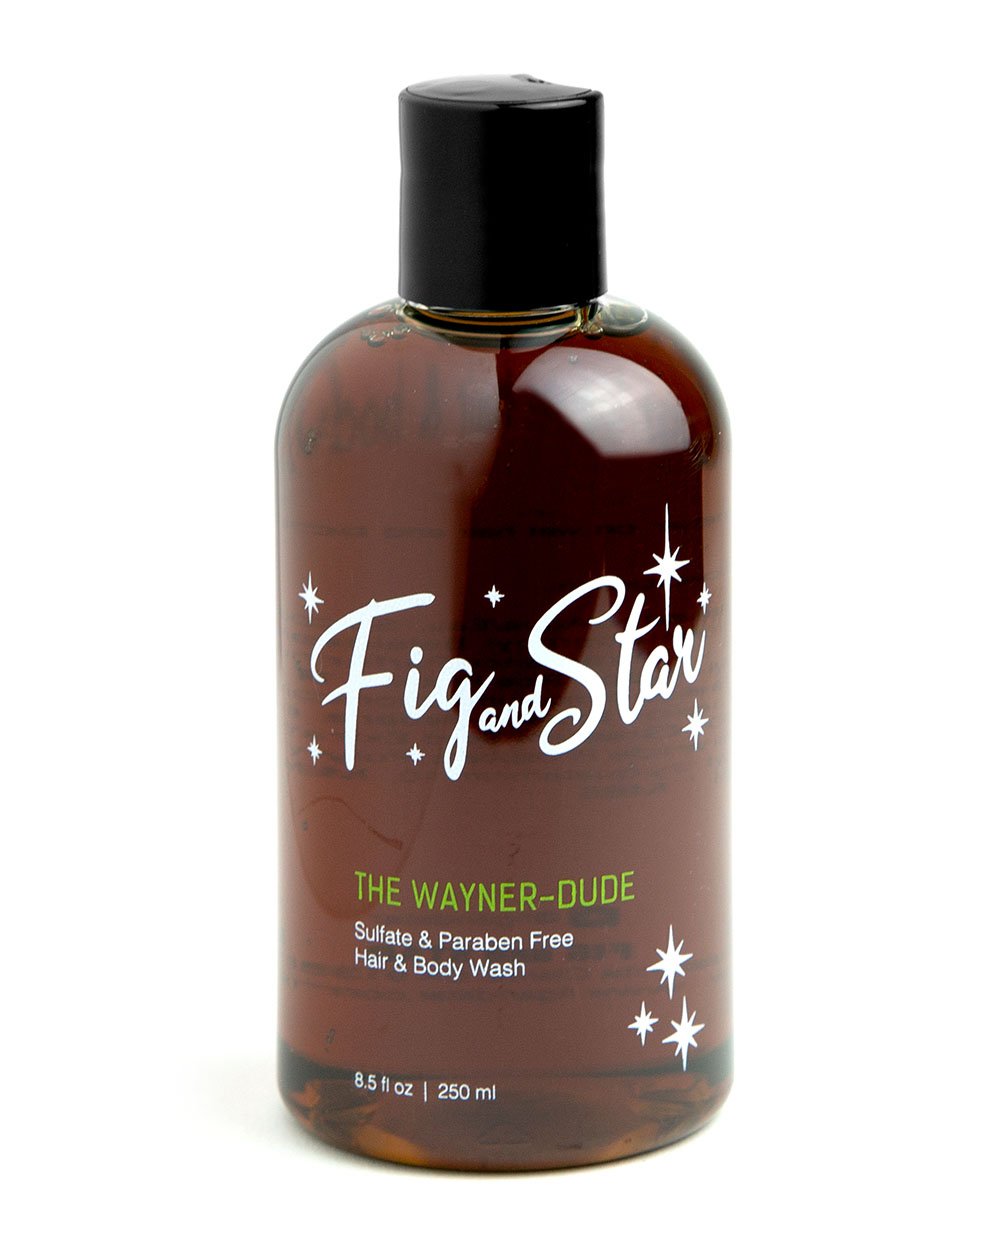 The Wayner-Dude! - fig and star 